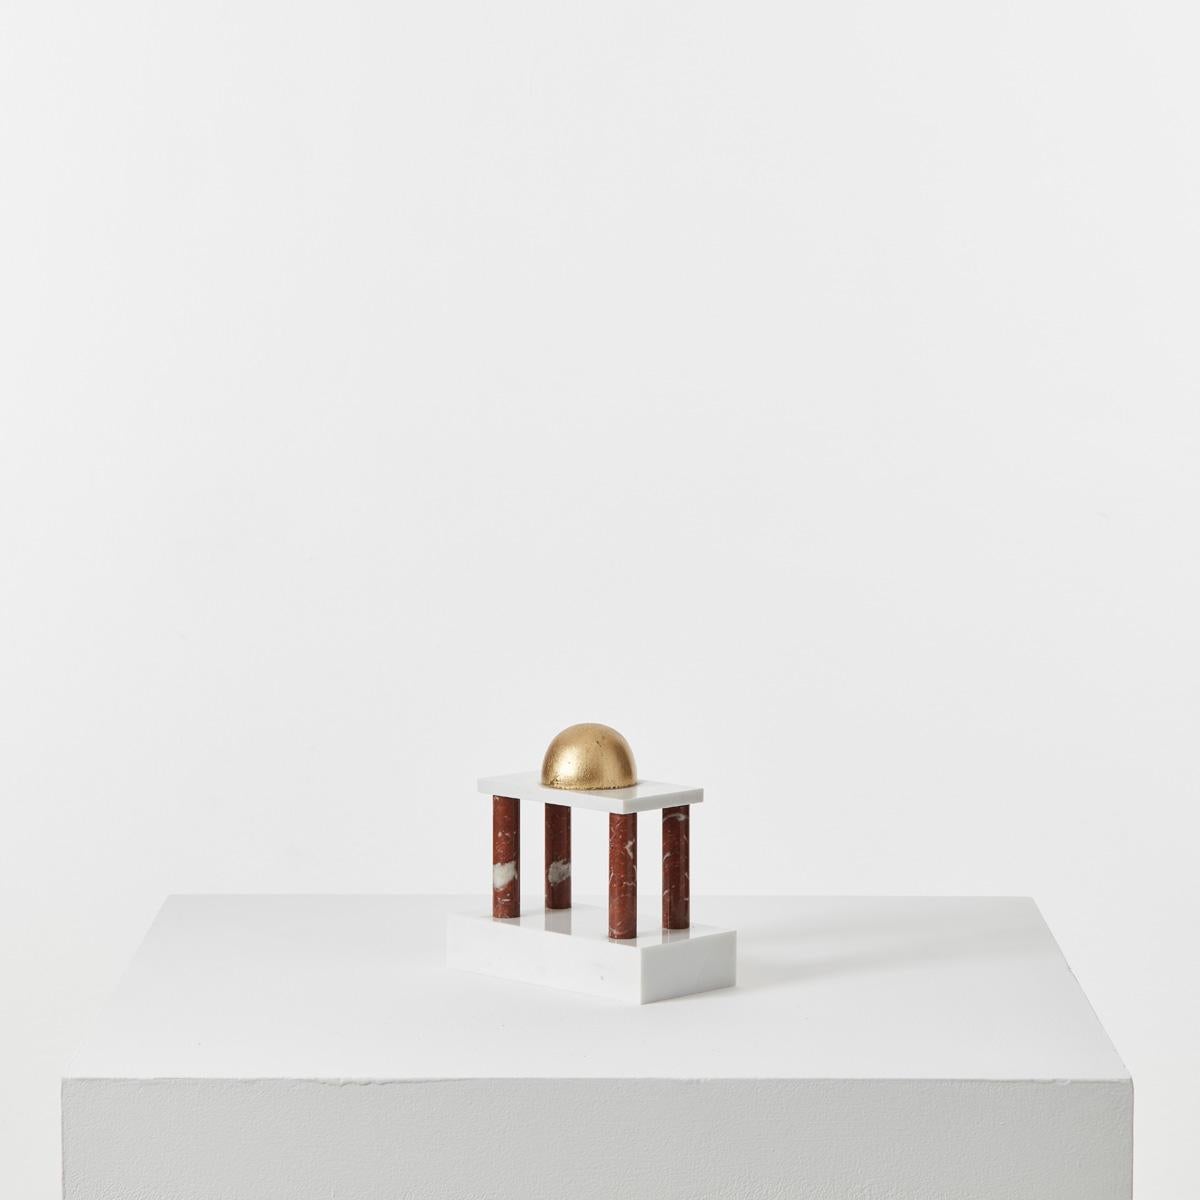 Italian Architectural Sculpture by Sottsass for Ultima Edizione, Italy 1986 For Sale